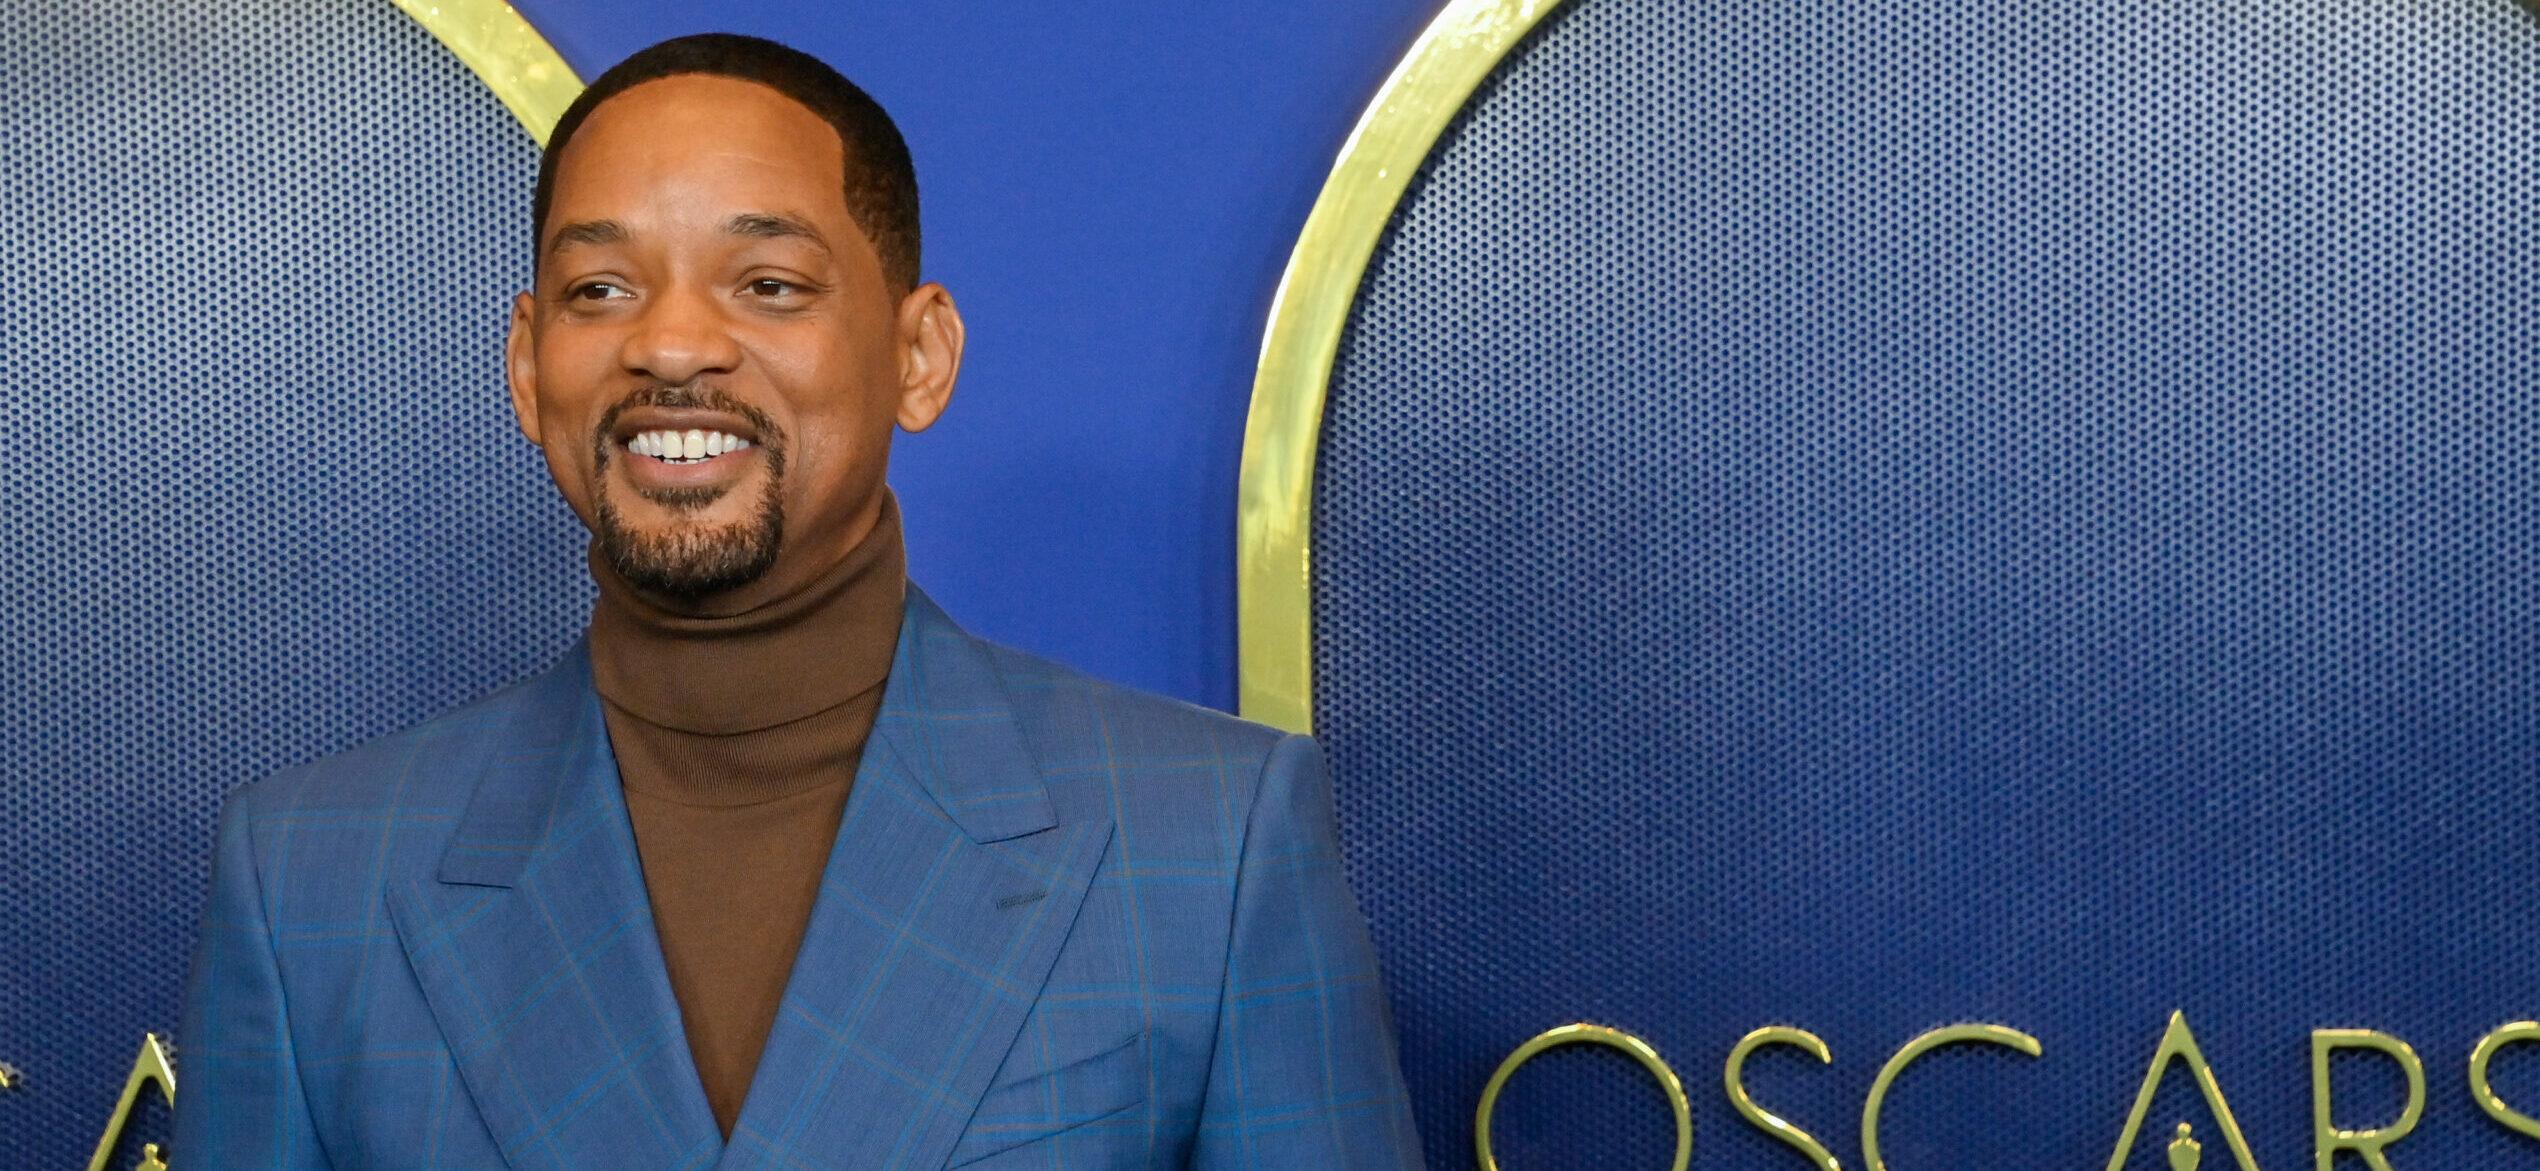 Will Smith Seen Hanging With Life Guru During Oscars Weekend As 10-Year Ban Begins